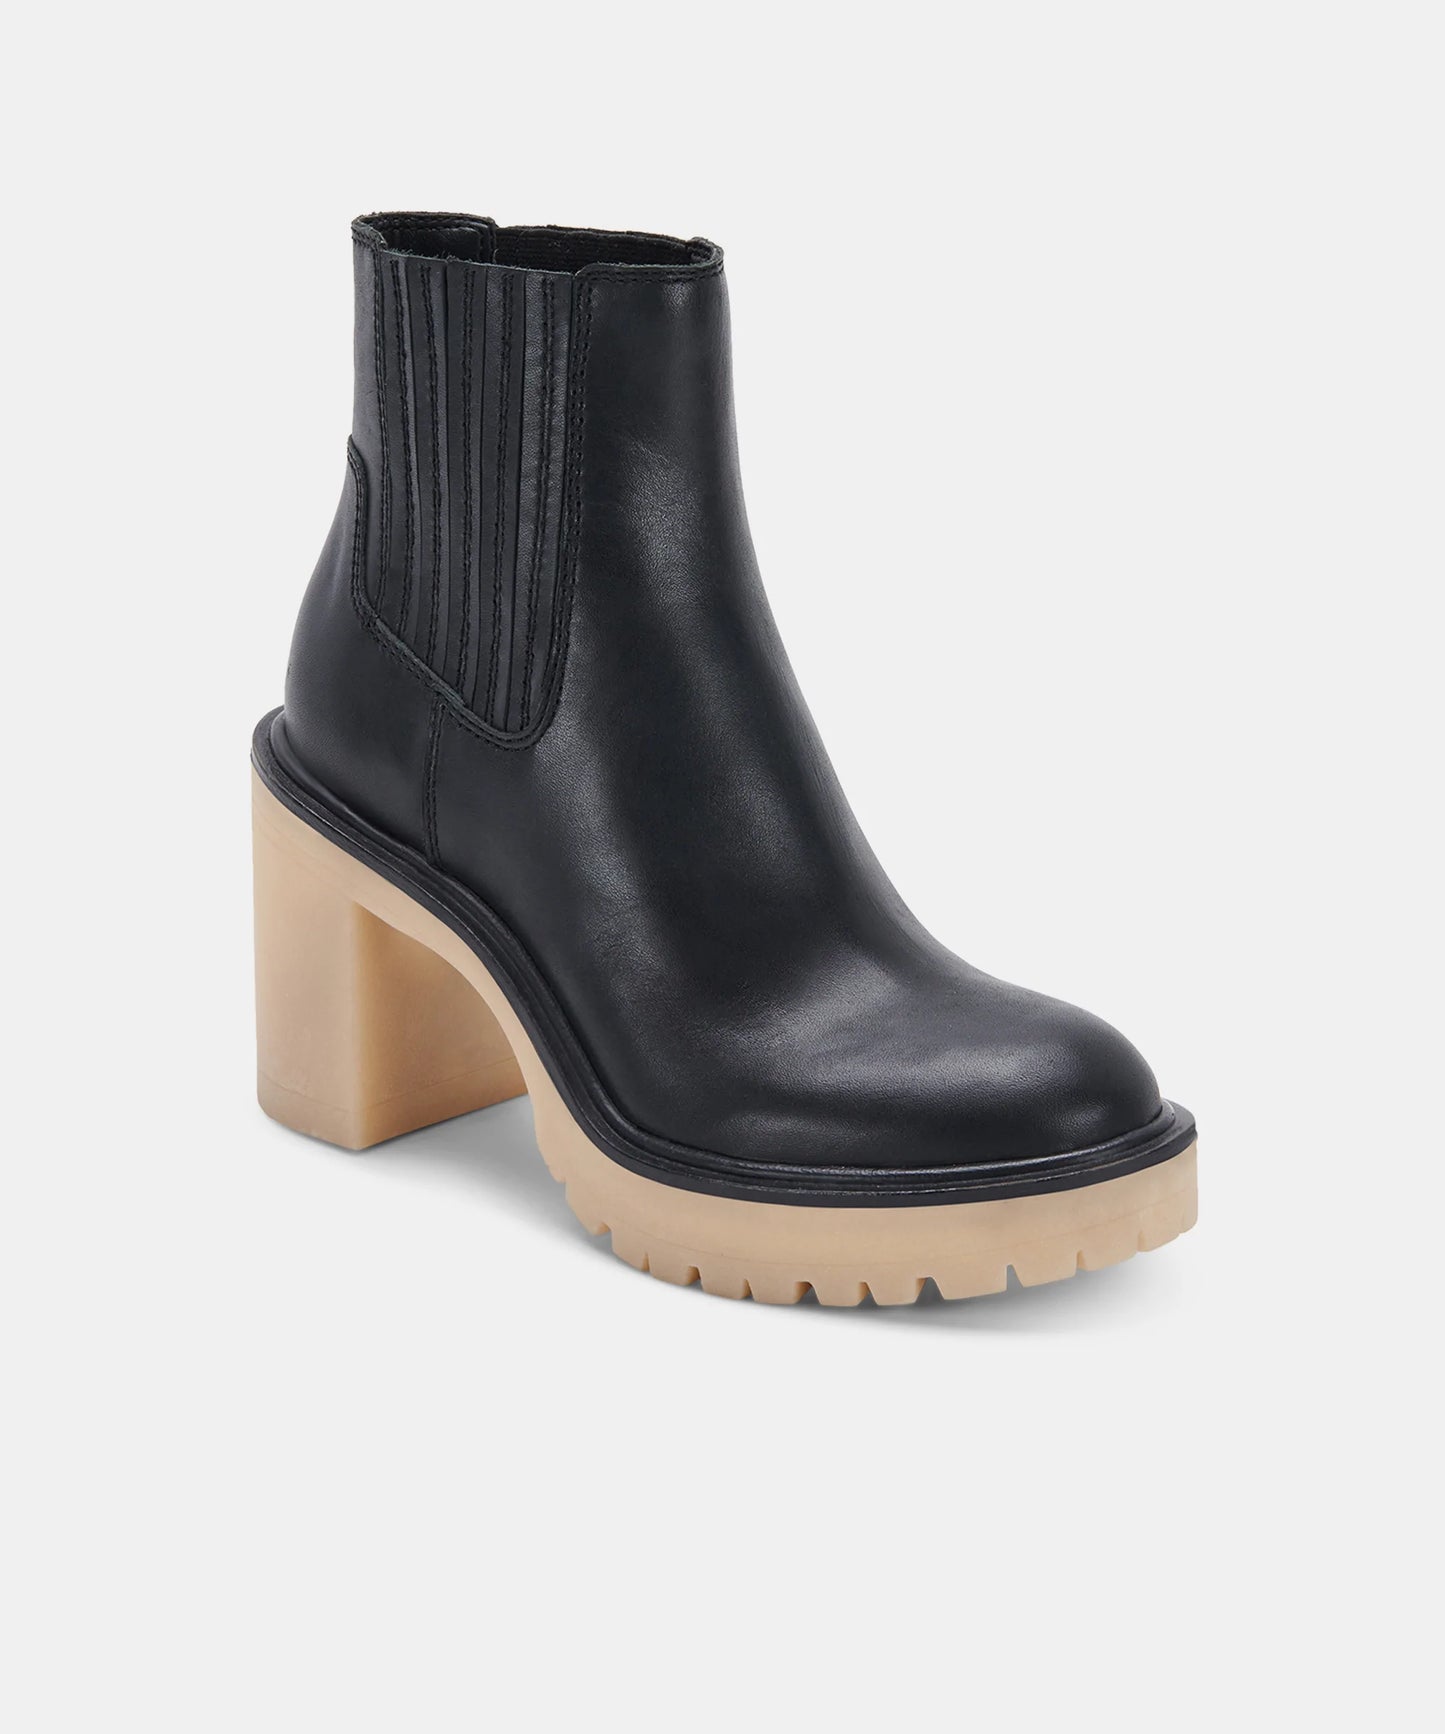 Dolce Vita Caster H20 Leather Bootie